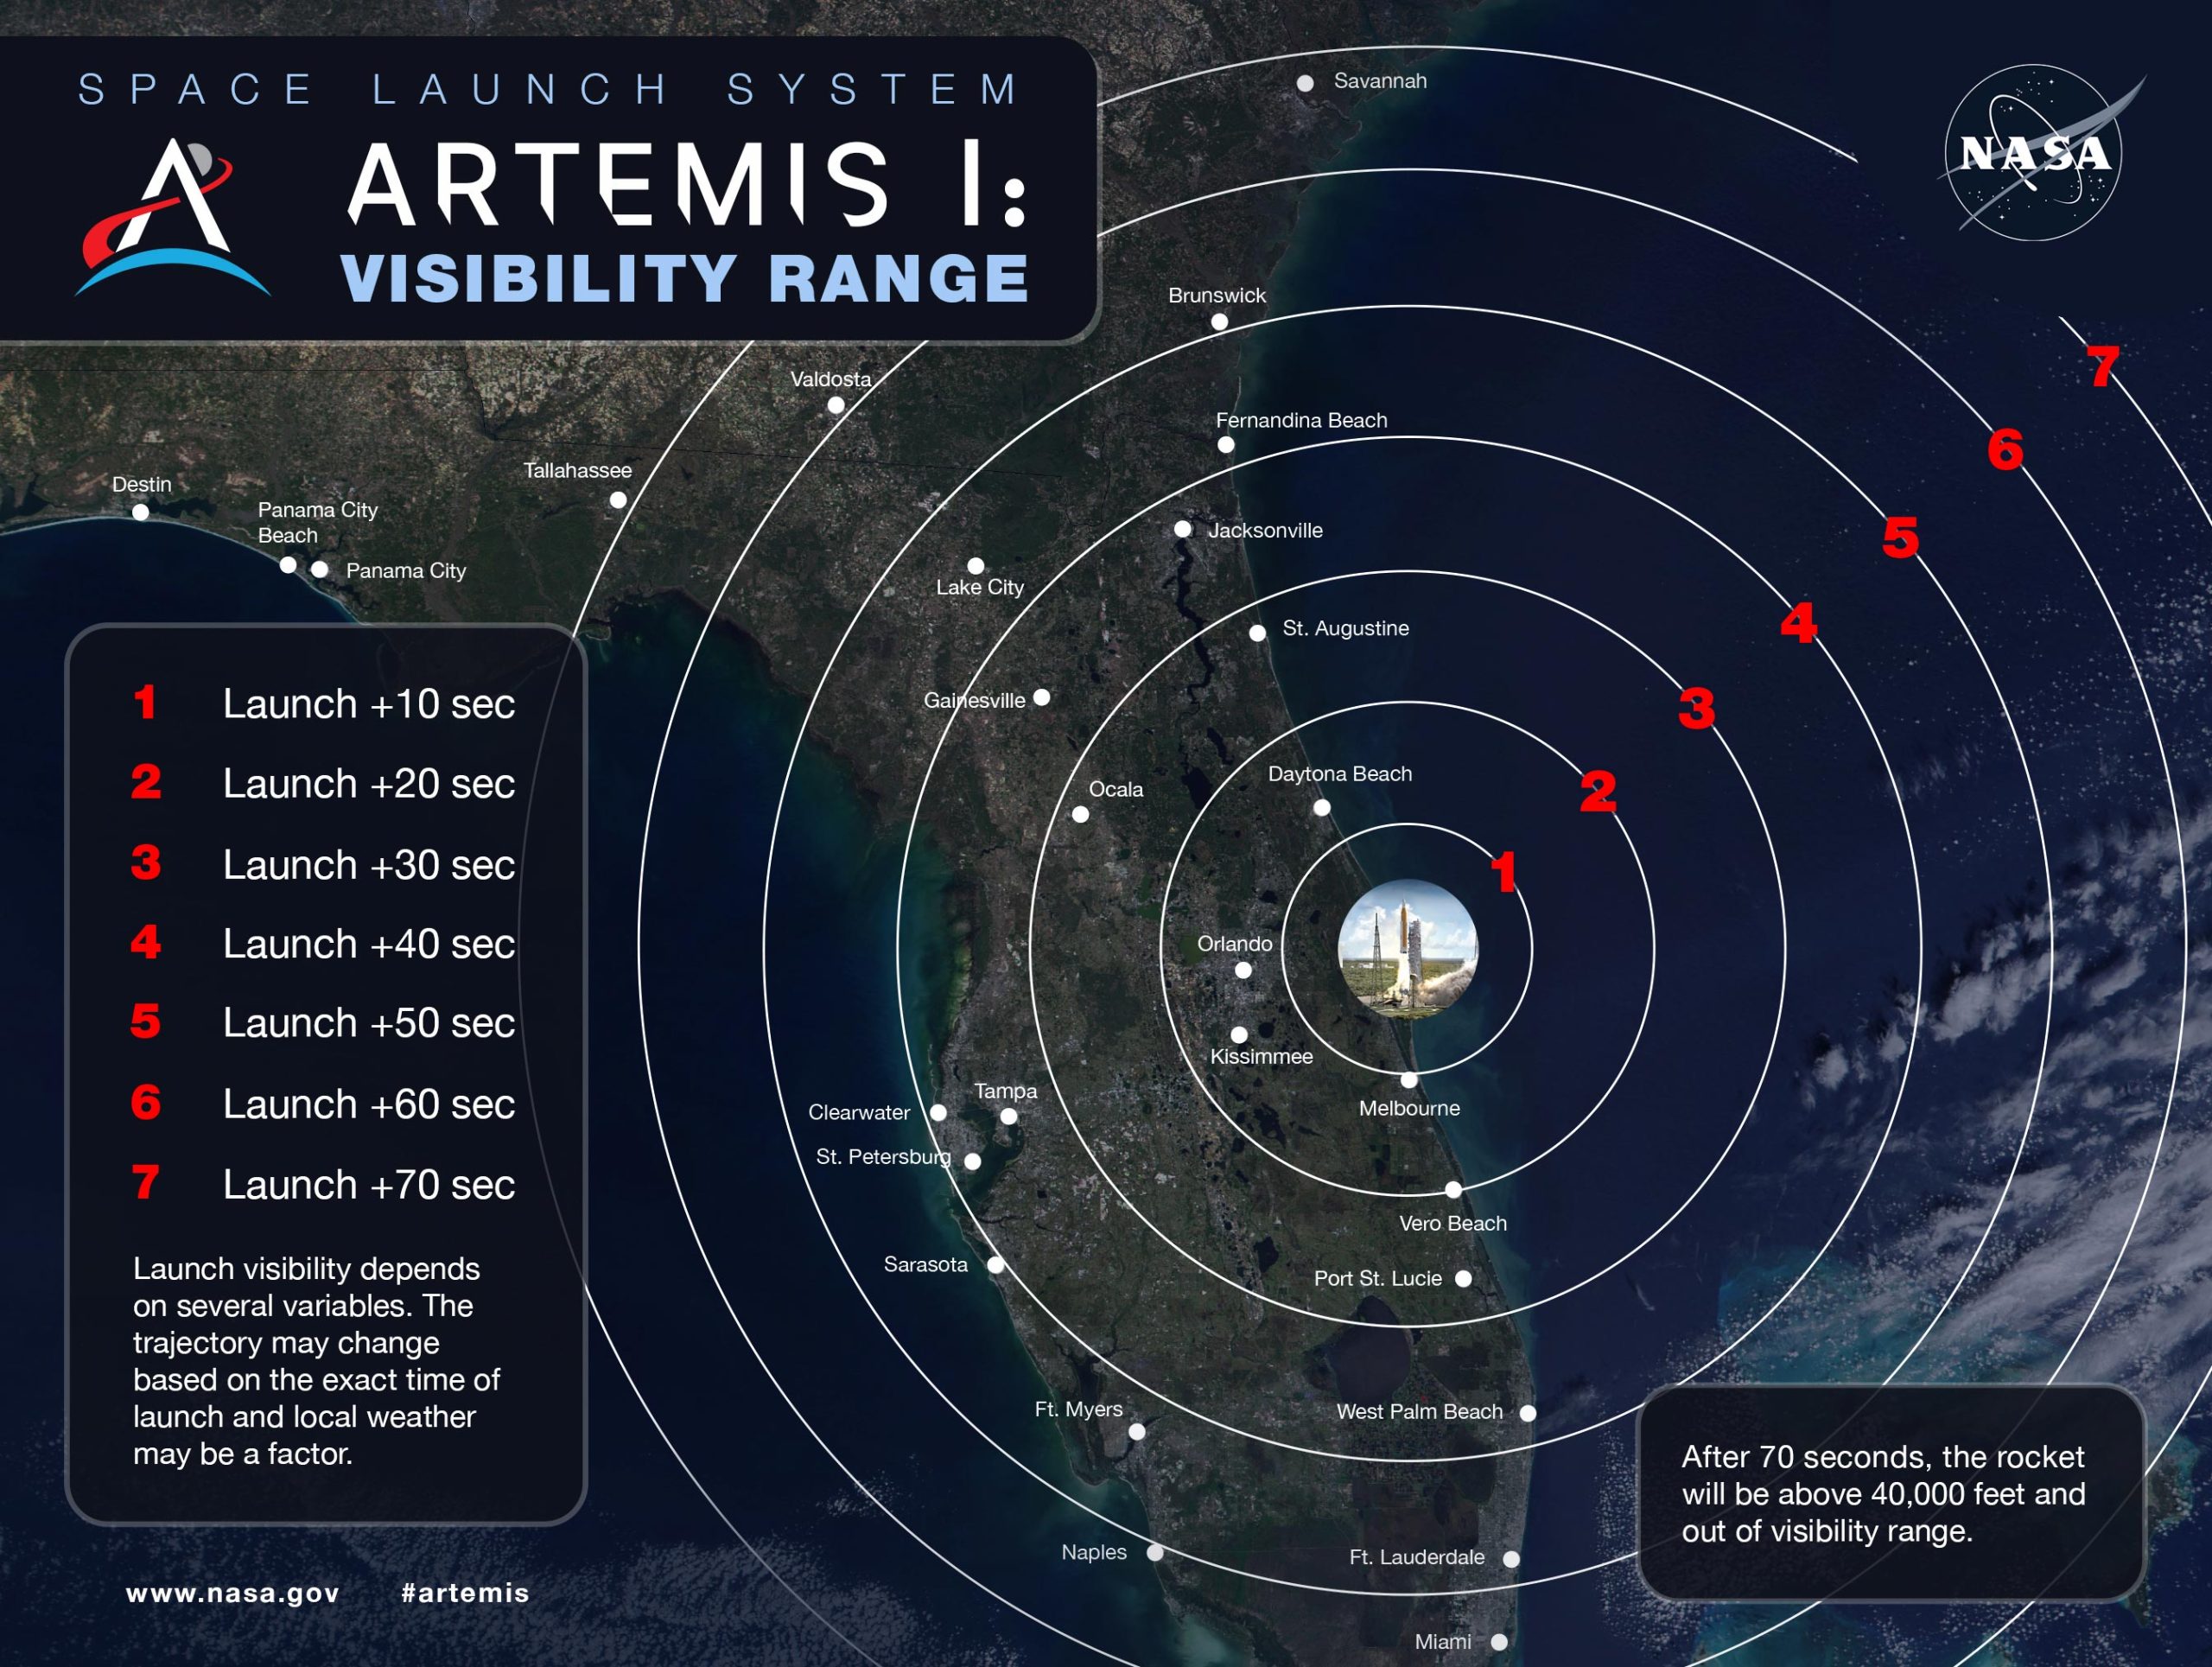 Visibility Range Map Where to See the Artemis I Mission Liftoff to the